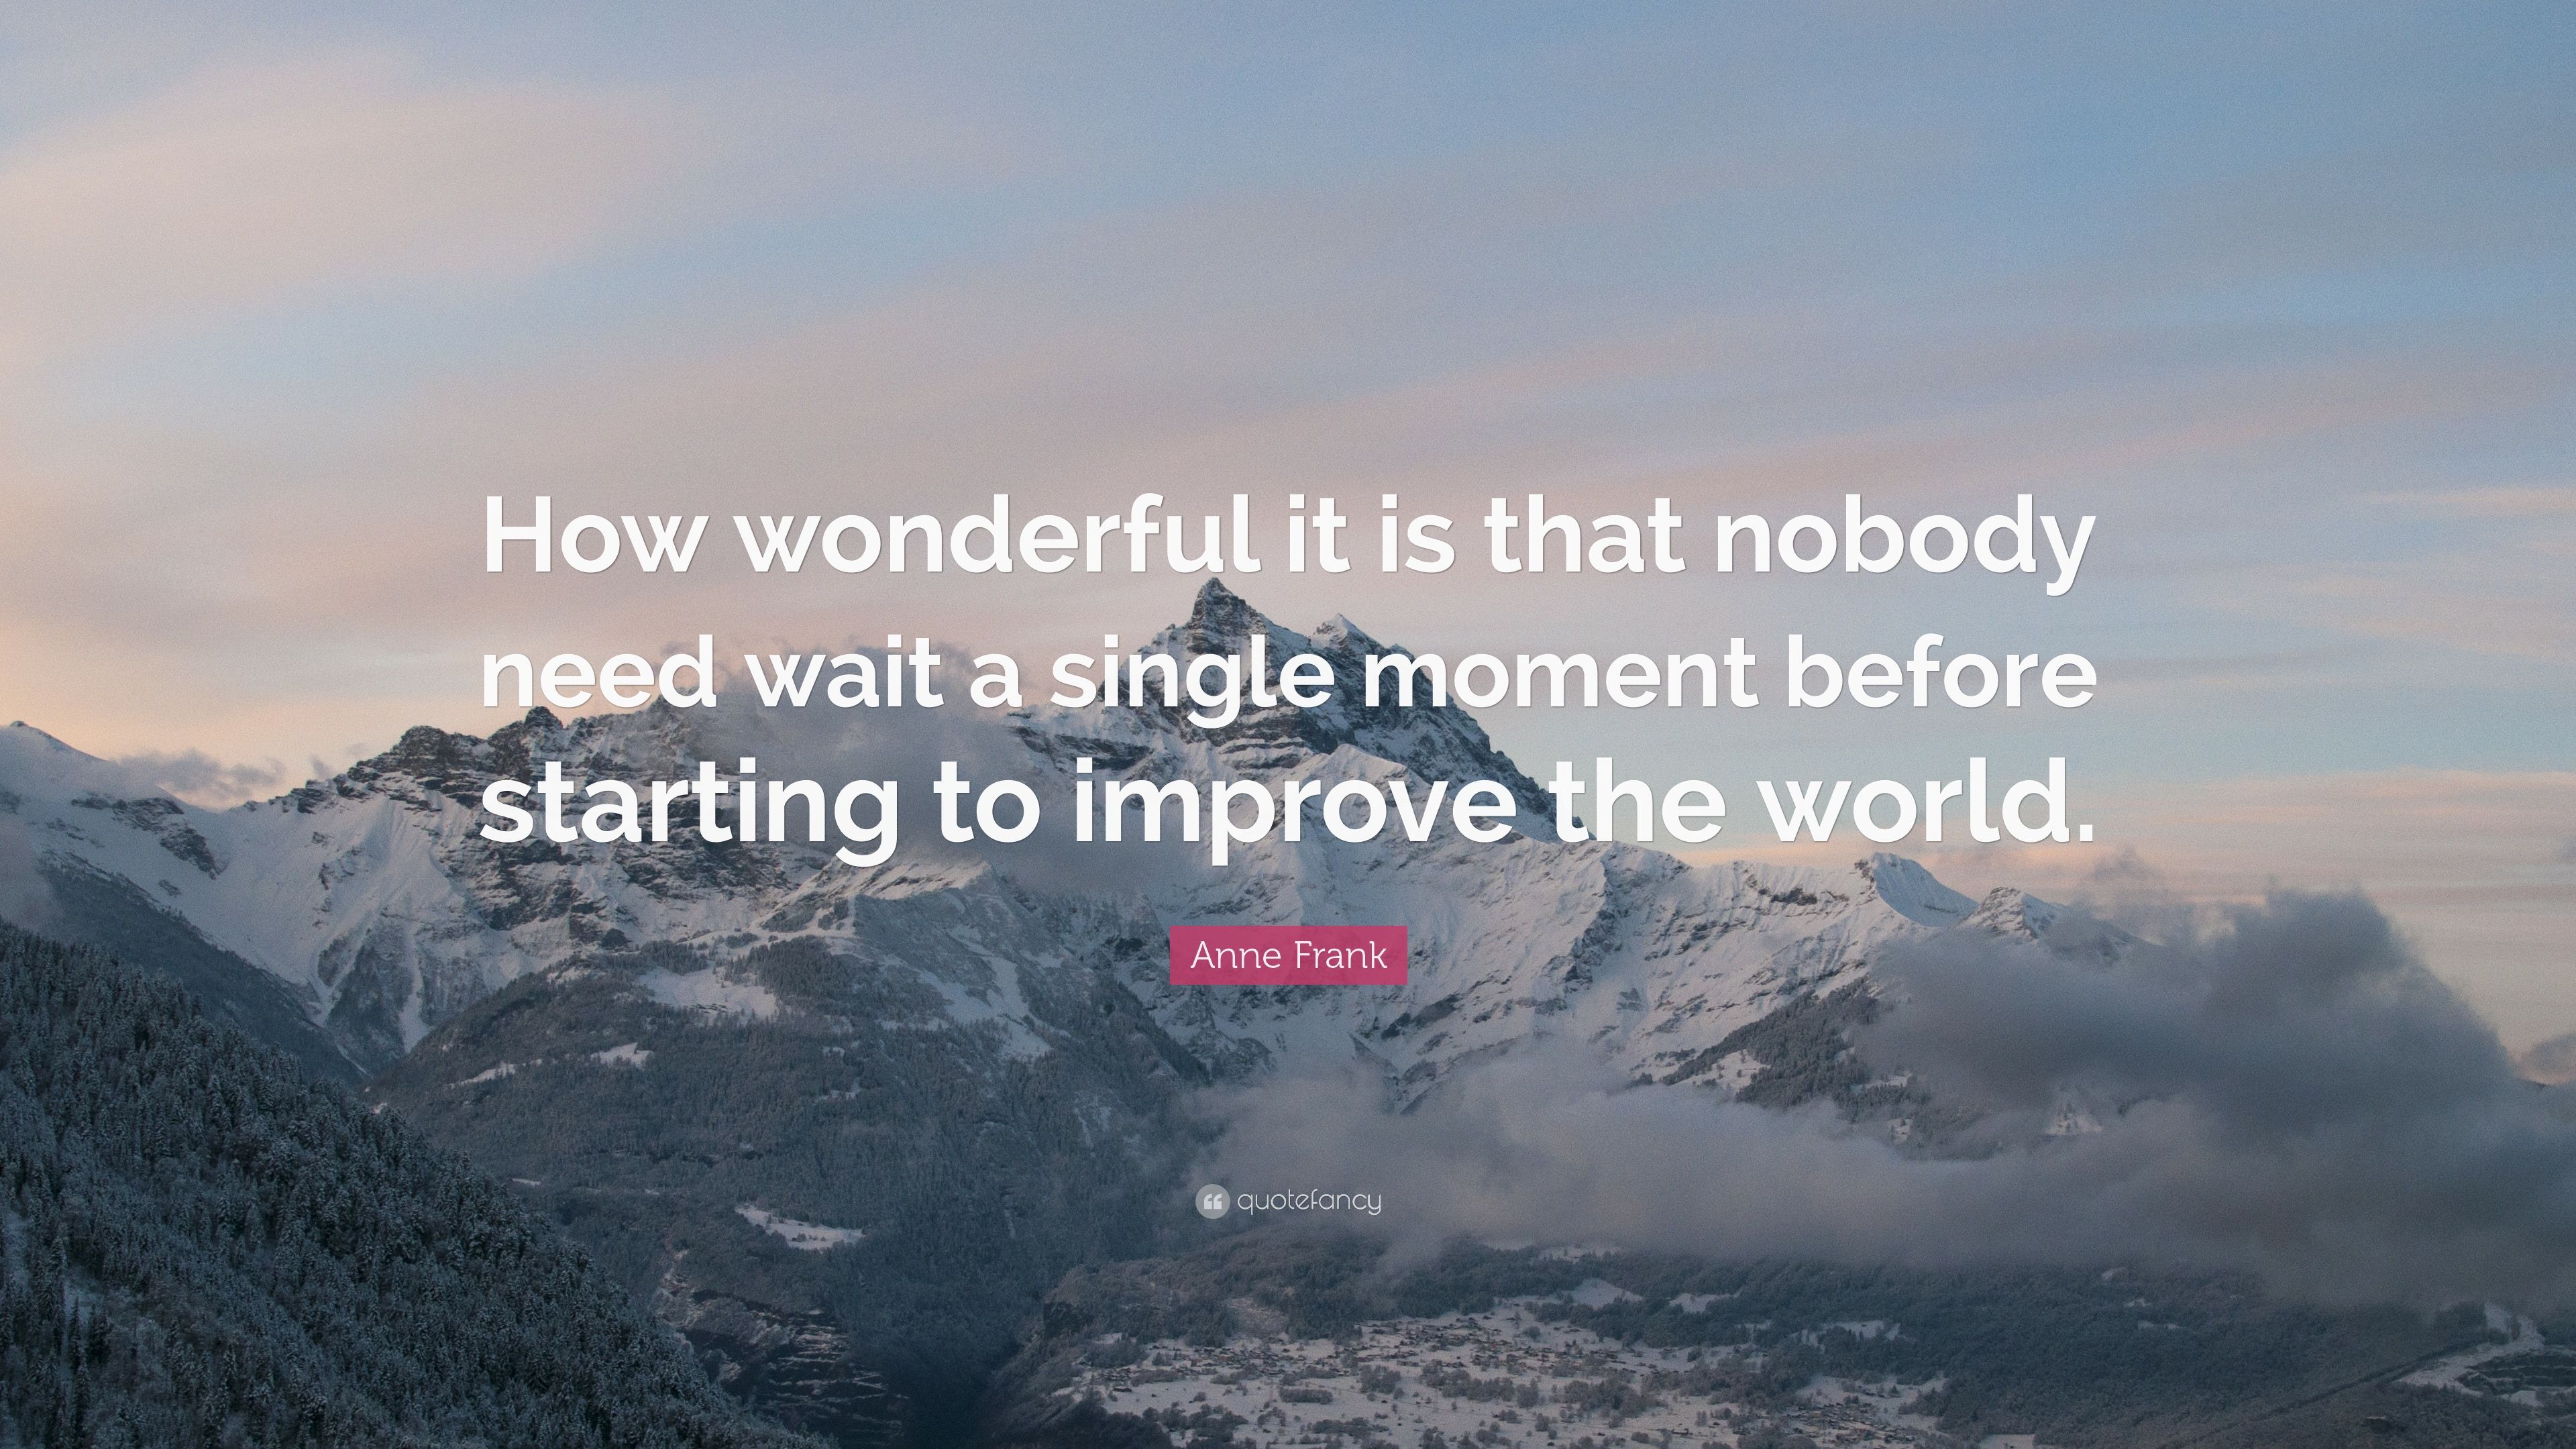 Anne Frank Quote: “How wonderful it is that nobody need wait a